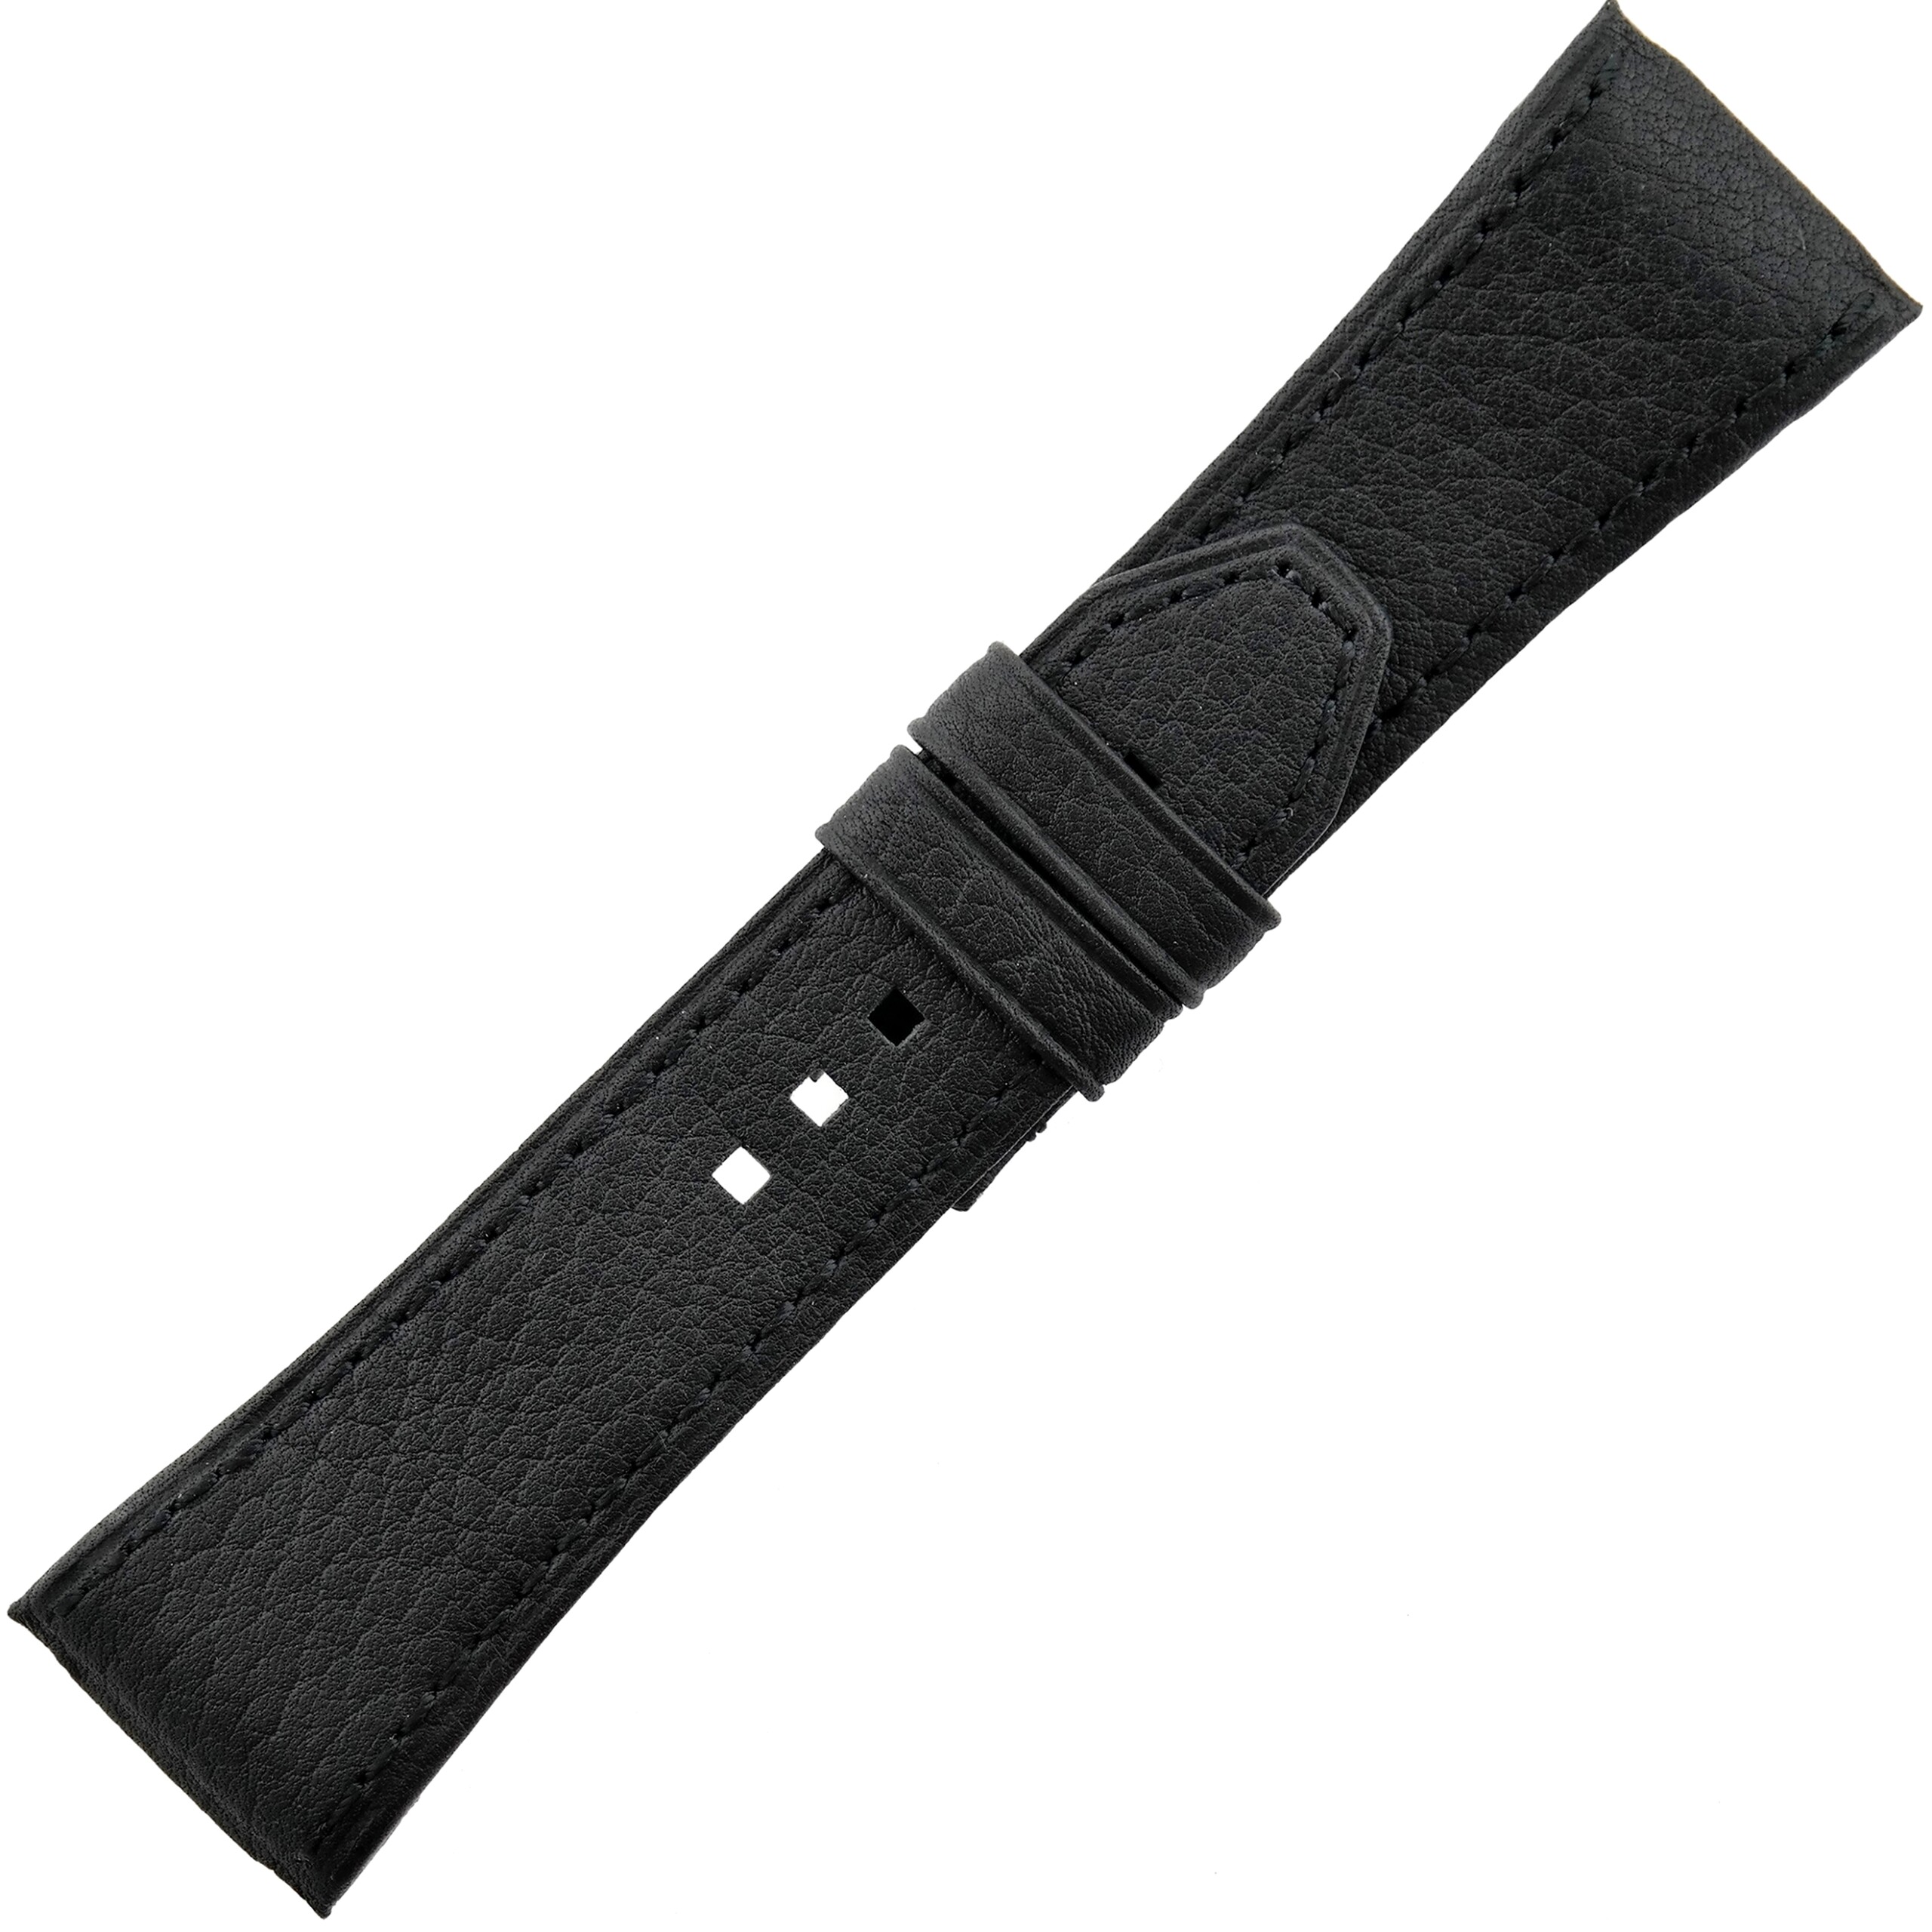 WYLER Geneve - CODE R/S - Leather Watch Strap - M - Black